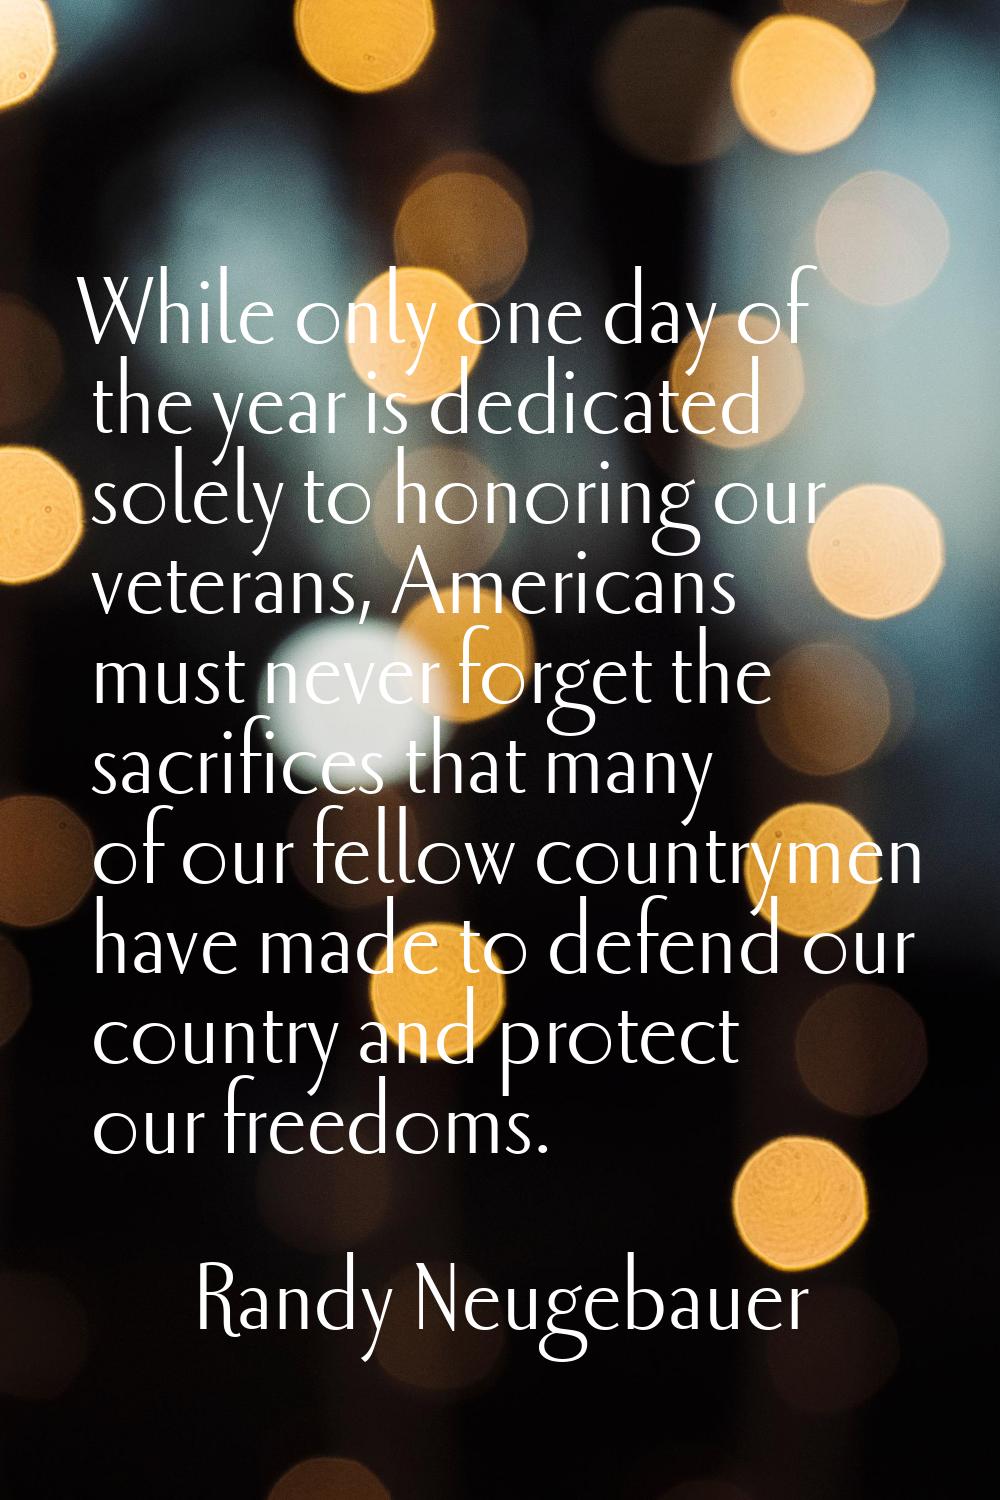 While only one day of the year is dedicated solely to honoring our veterans, Americans must never f